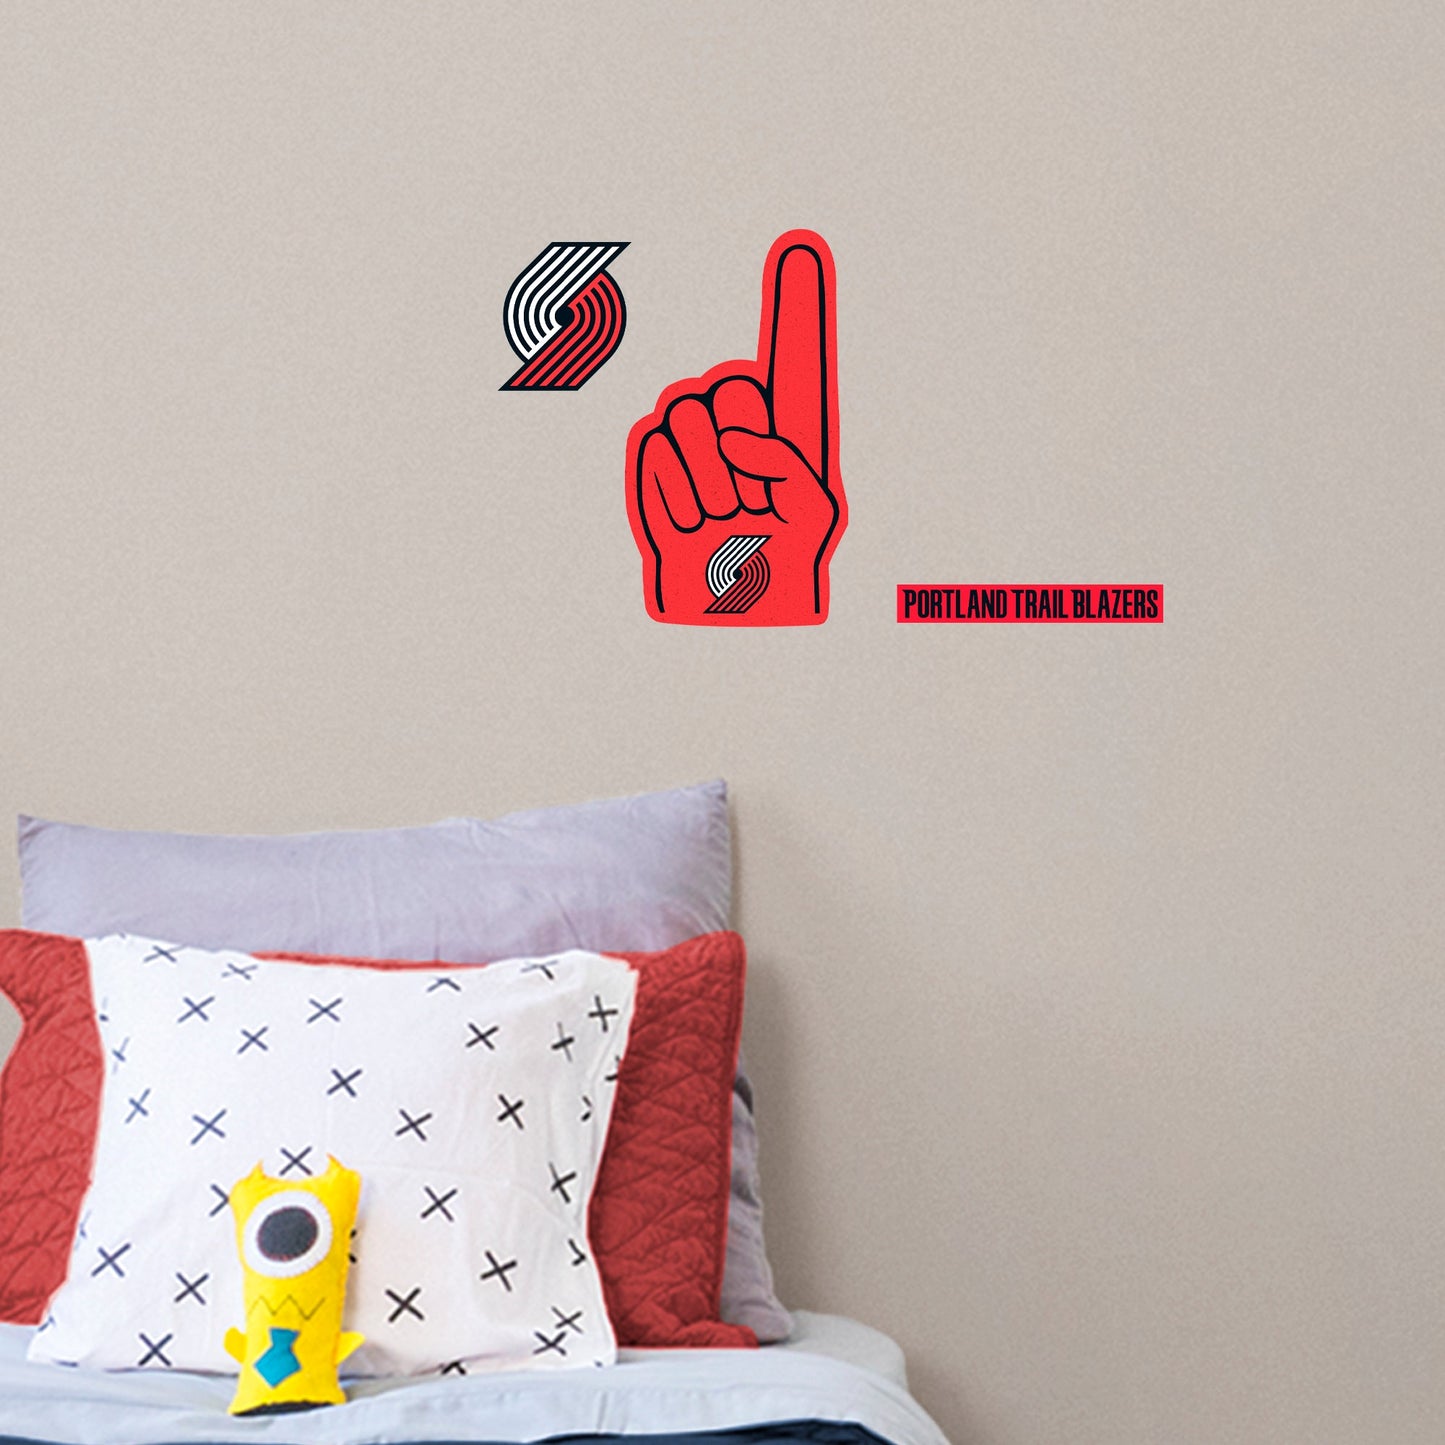 Portland Trail Blazers: Foam Finger - Officially Licensed NBA Removable Adhesive Decal